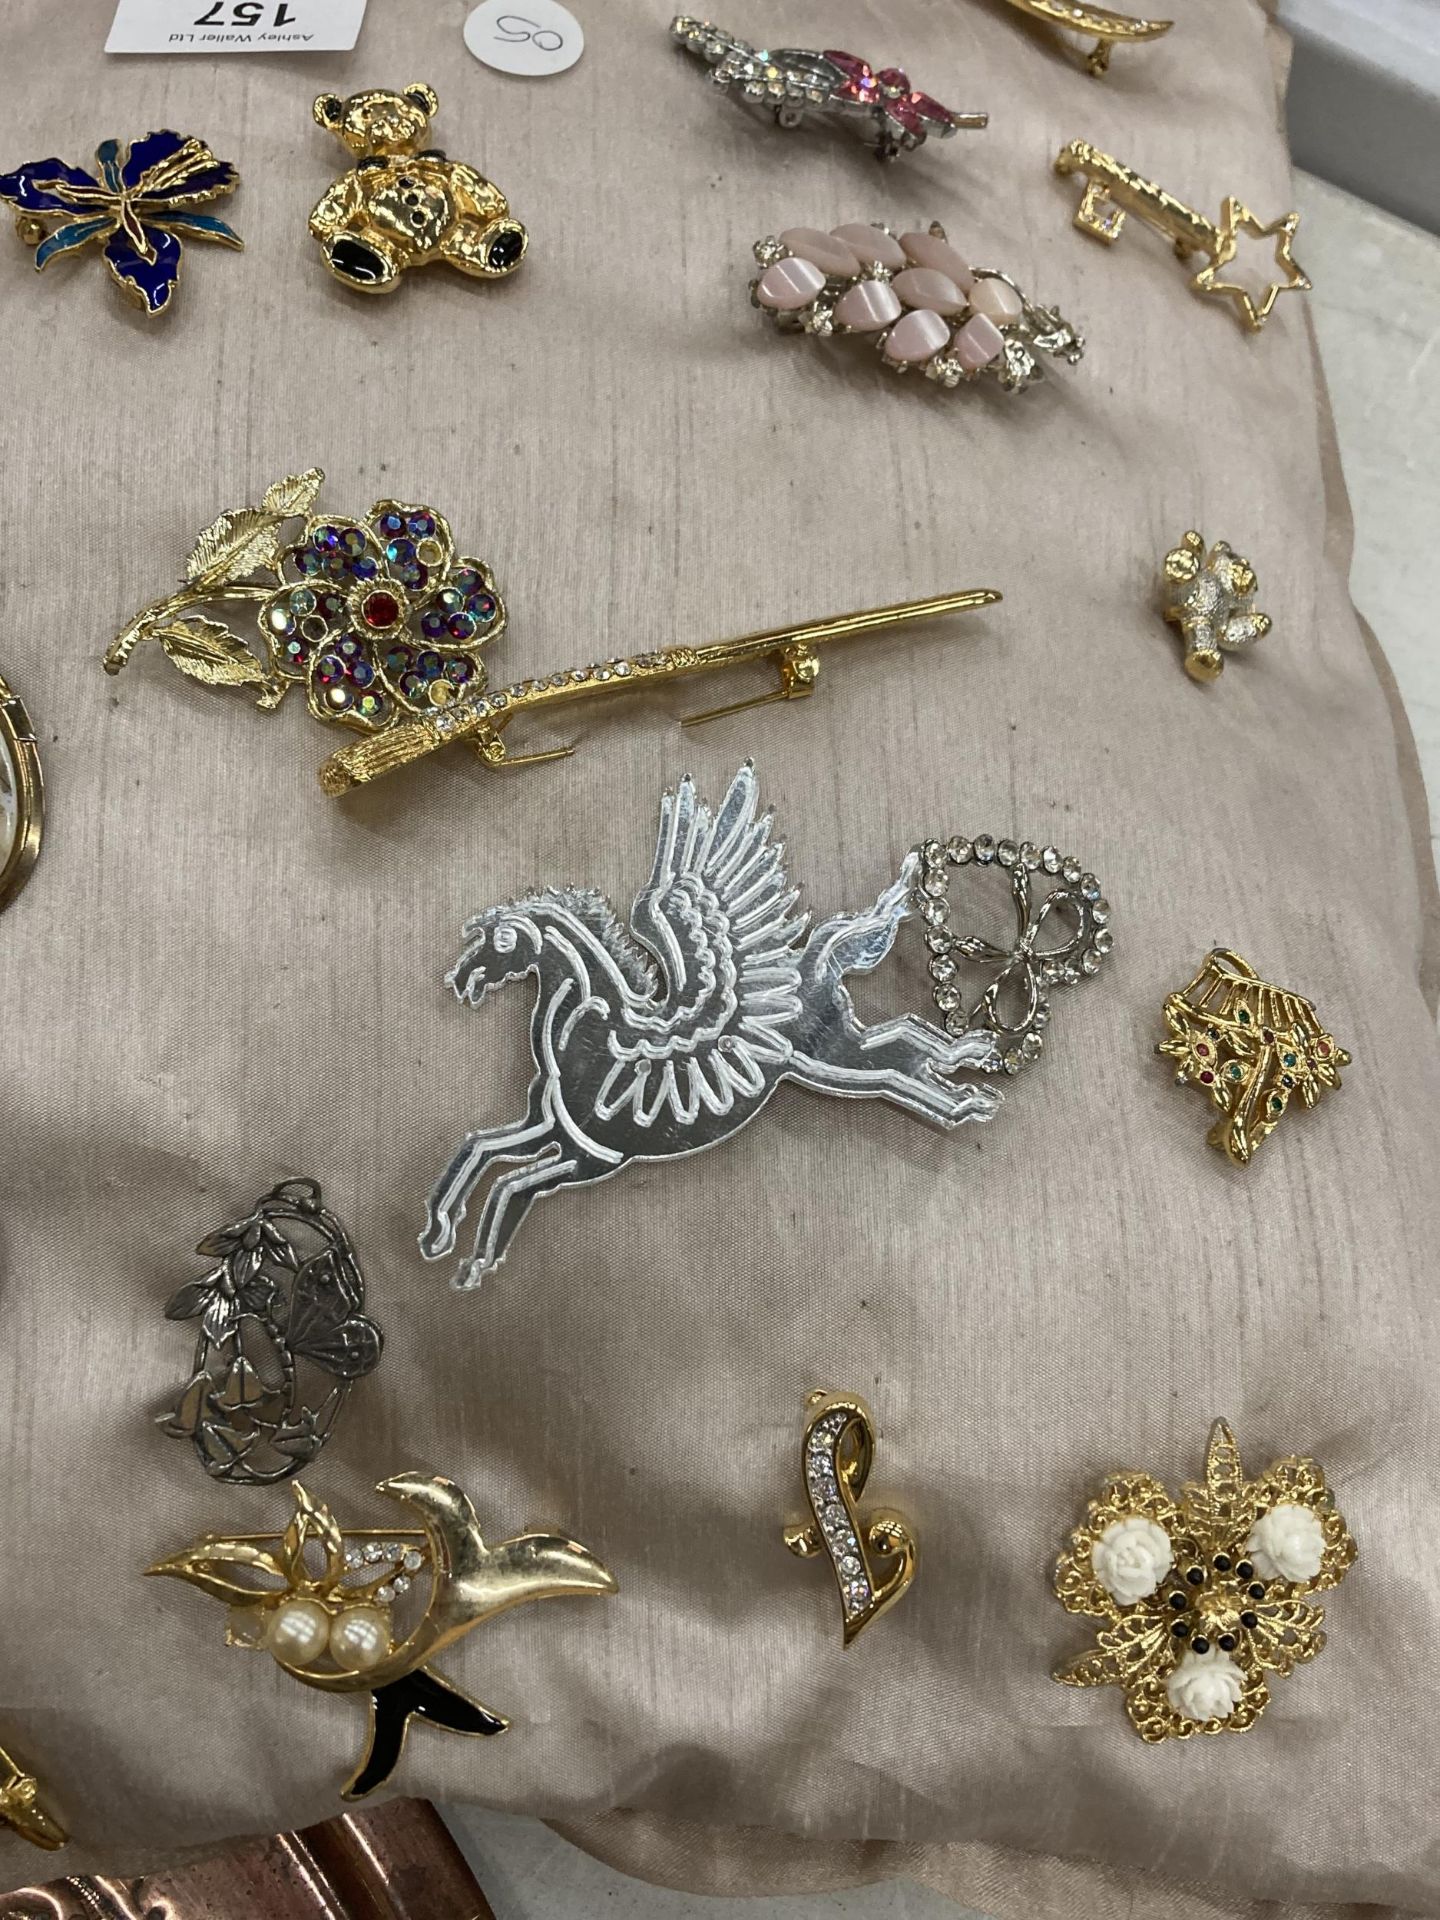 A CUSHION CONTAINING 40 COSTUME JEWELLERY BROOCHES - Image 5 of 5